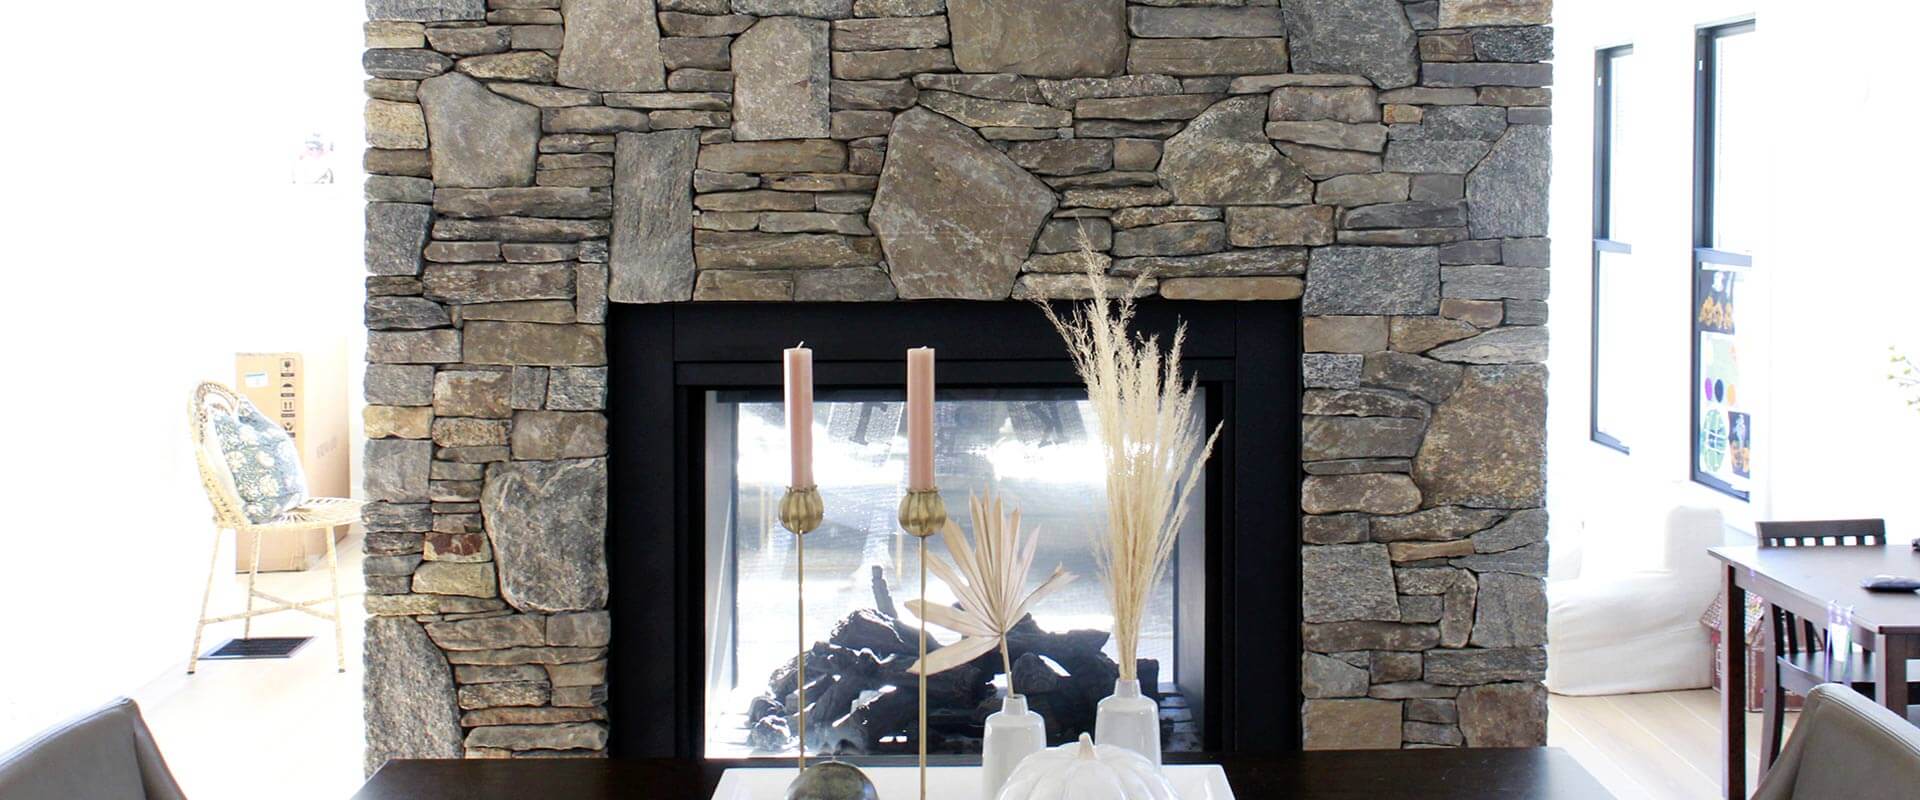 Fireplace in a Modern Farmhouse in Waterford, CT